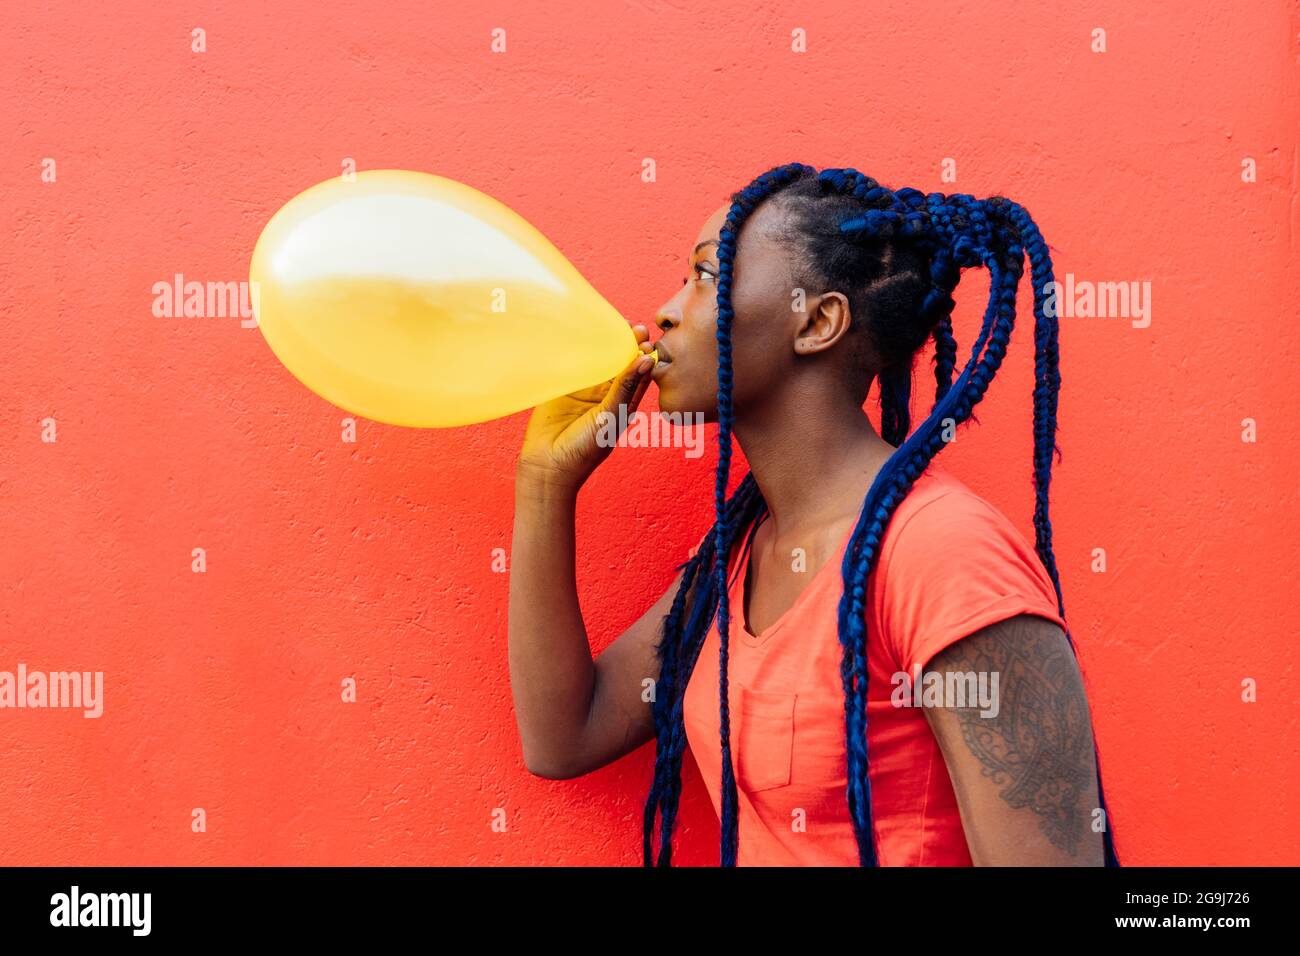 Italy, Milan, Young woman with braids blowing yellow balloon Stock Photo